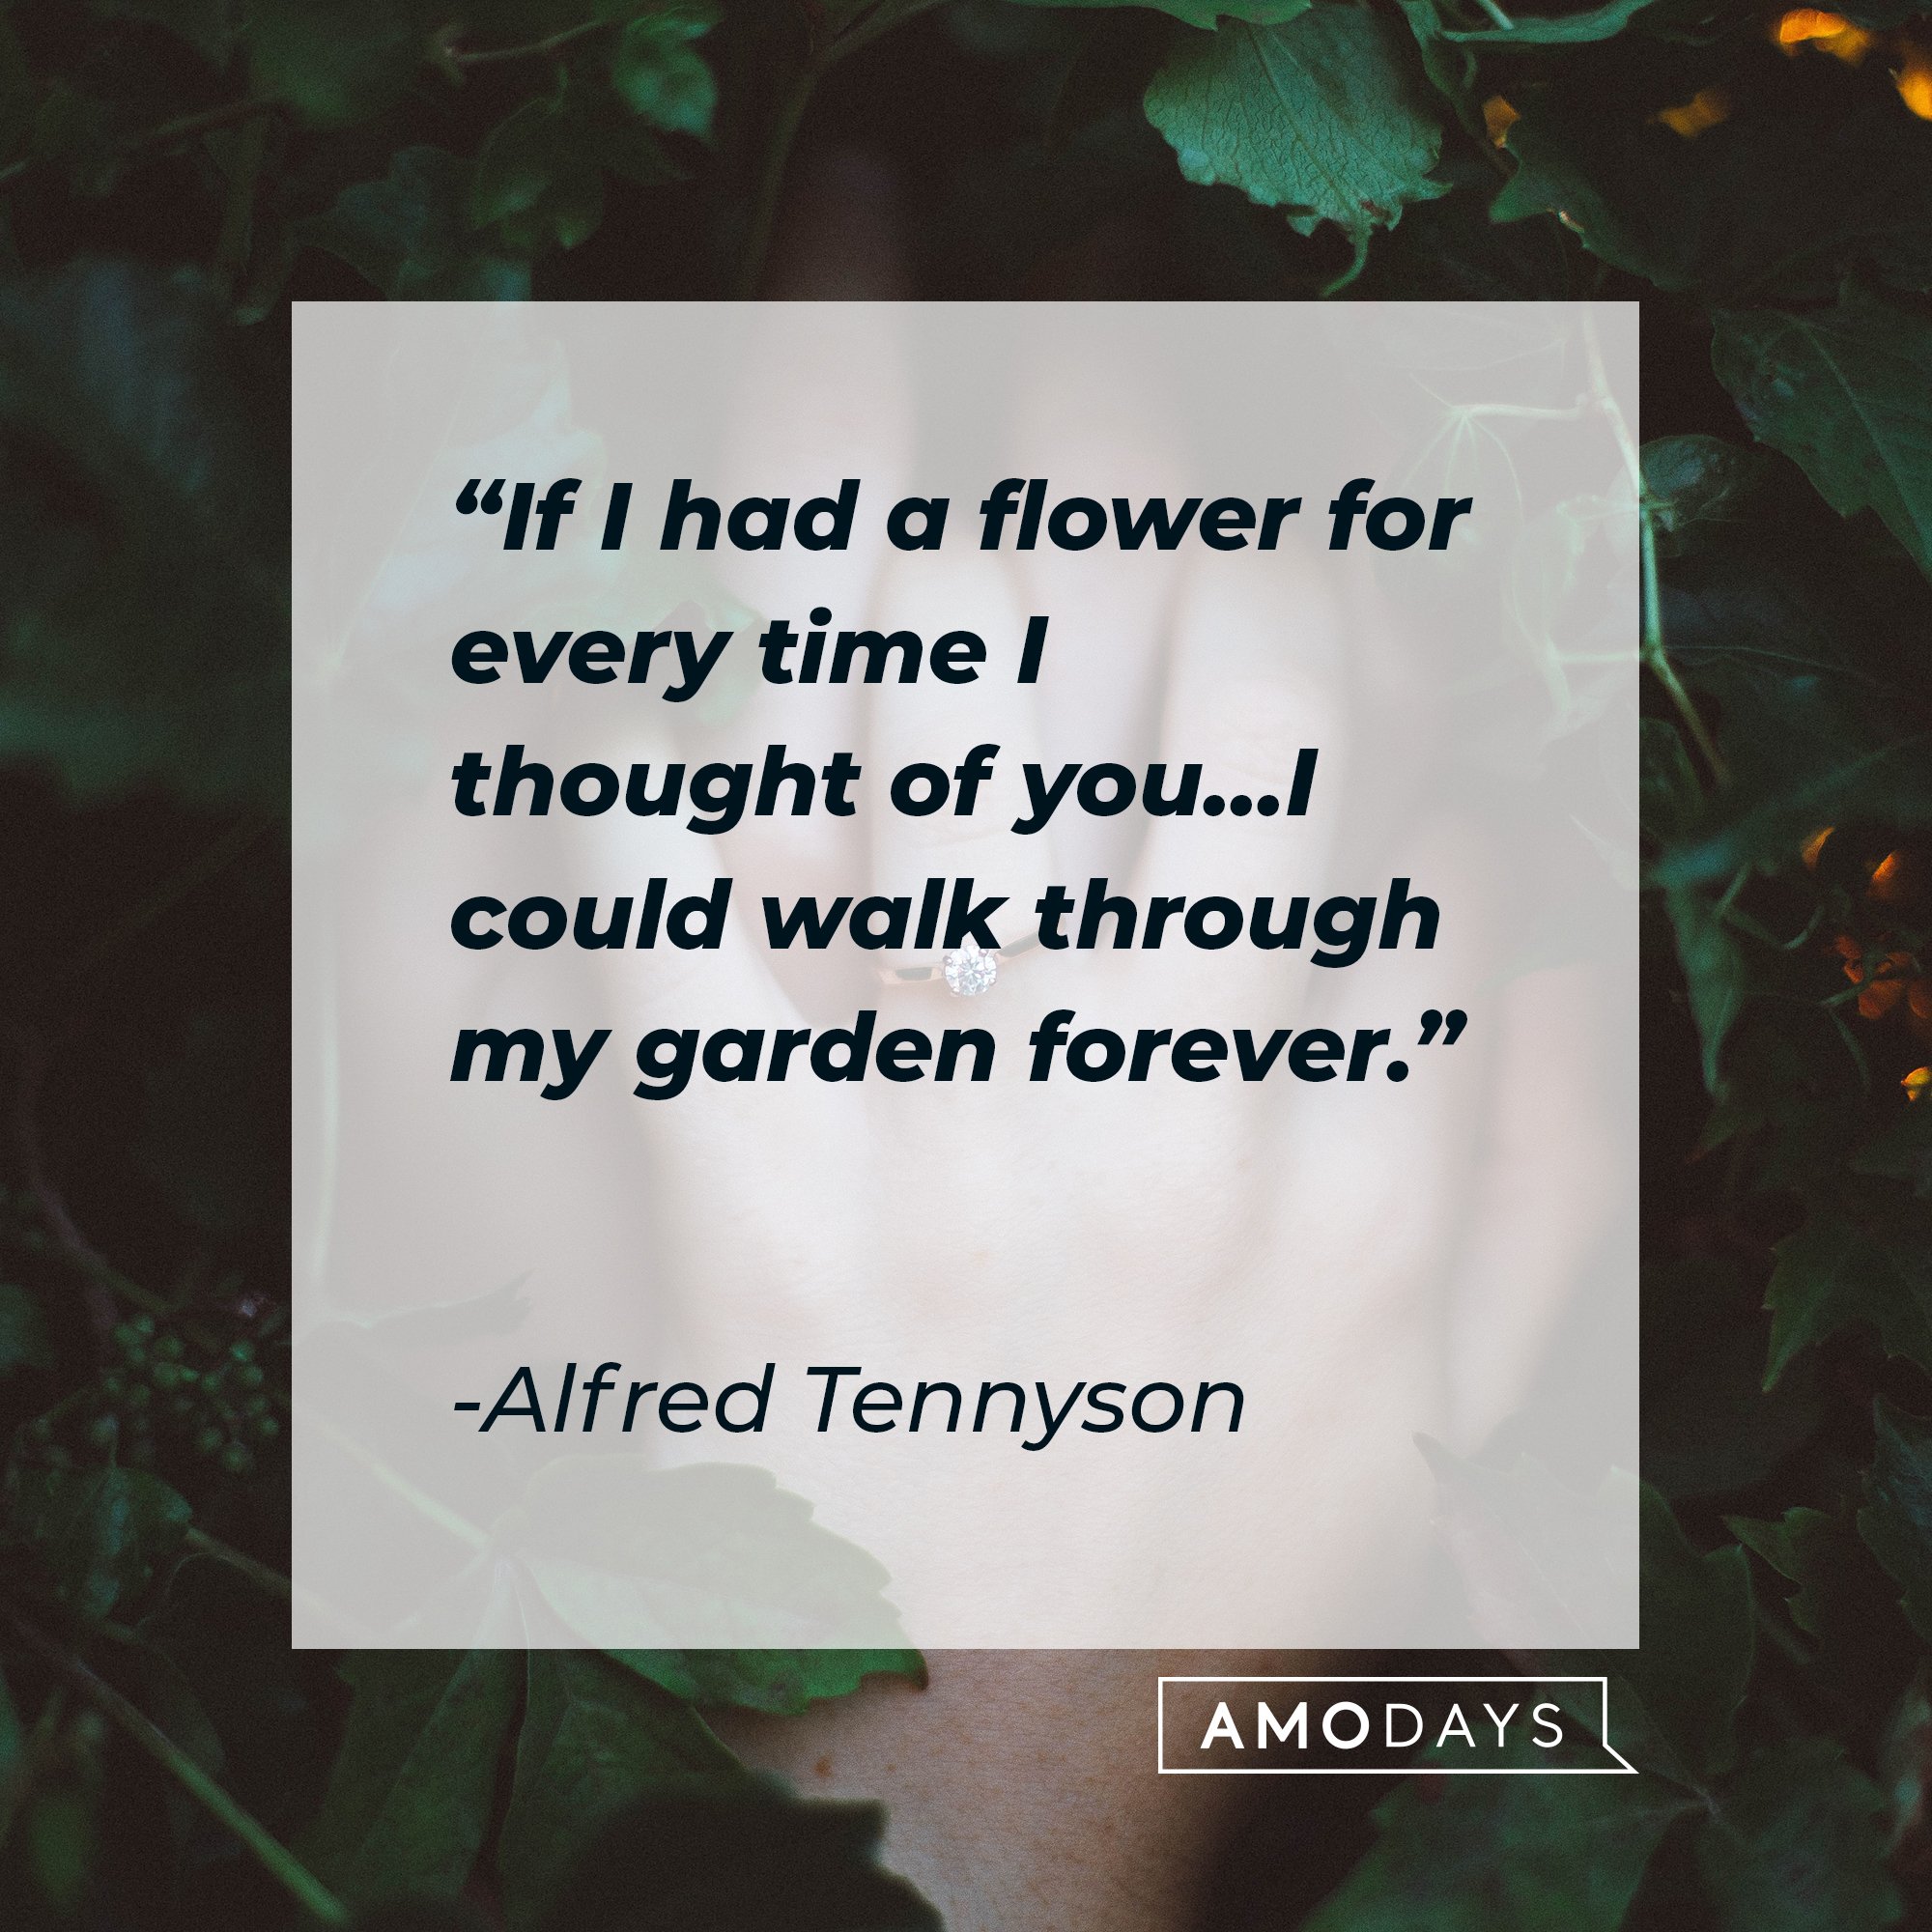 Alfred Tennyson’s quote: "If I had a flower for every time I thought of you…I could walk through my garden forever." | Image: AmoDays 